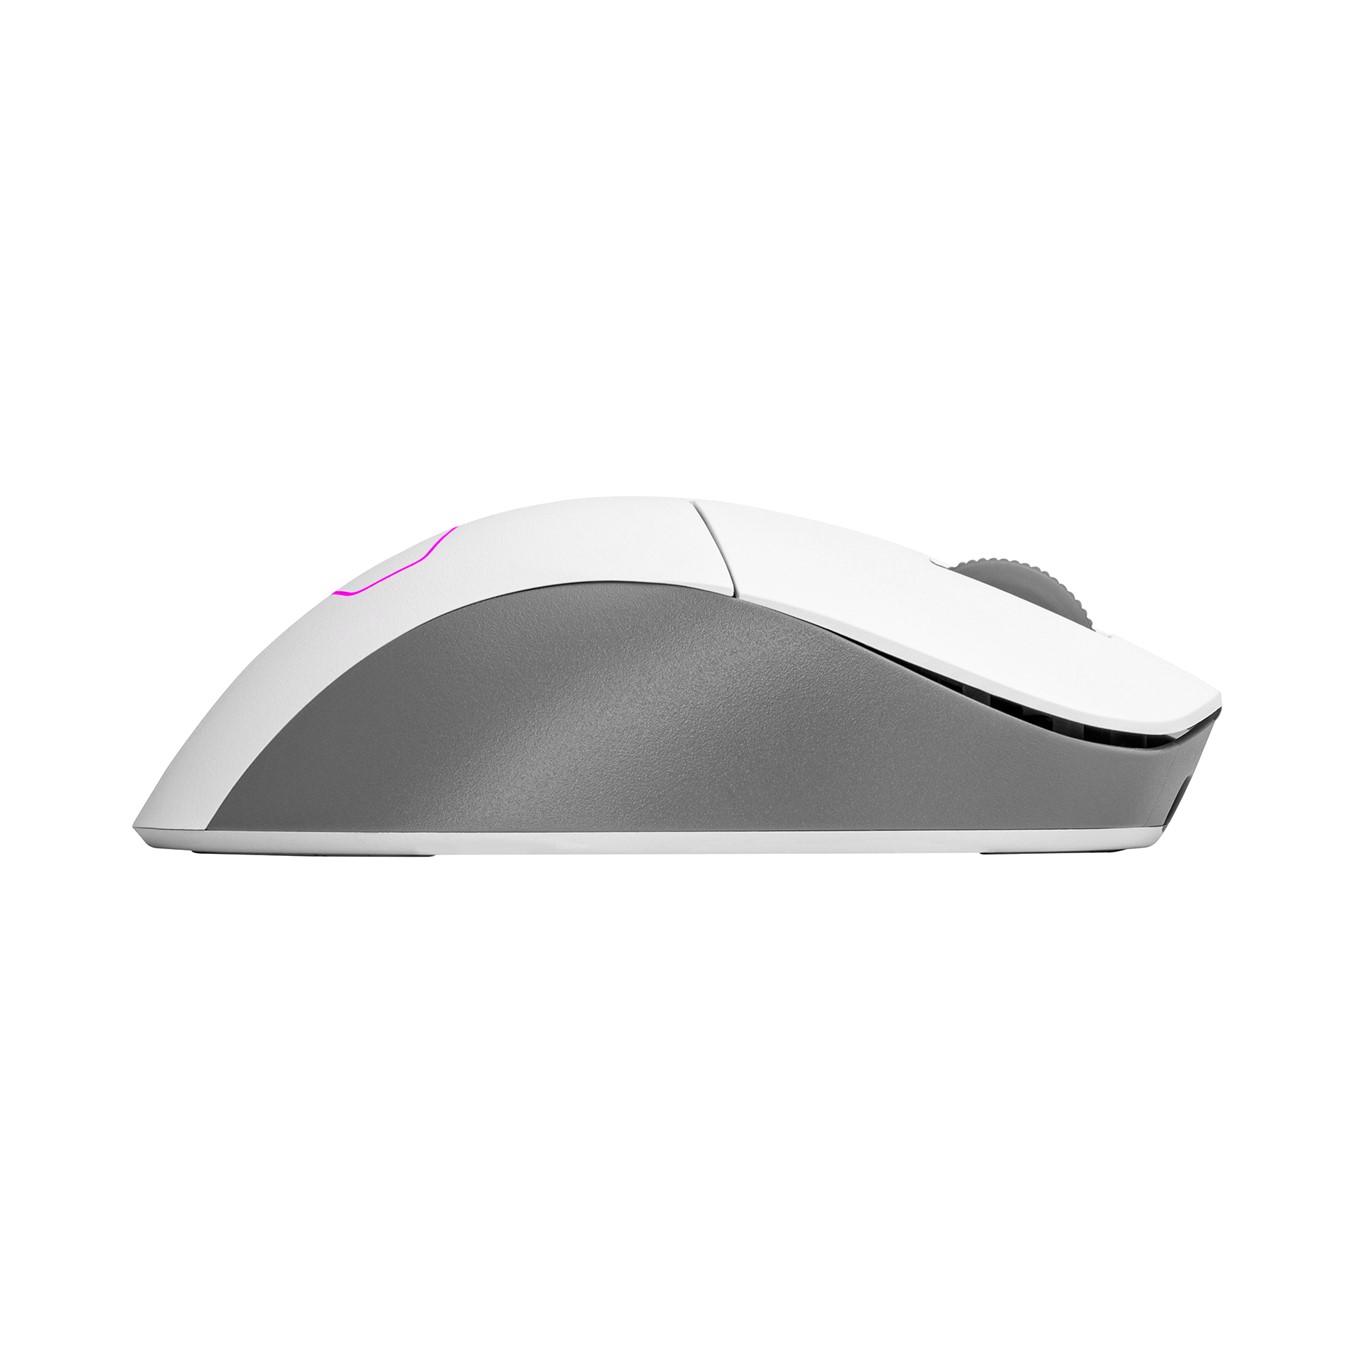 COOLER MASTER MM731 WIRELESS GAMING MOUSE - WHITE - MM-731-WWOH1